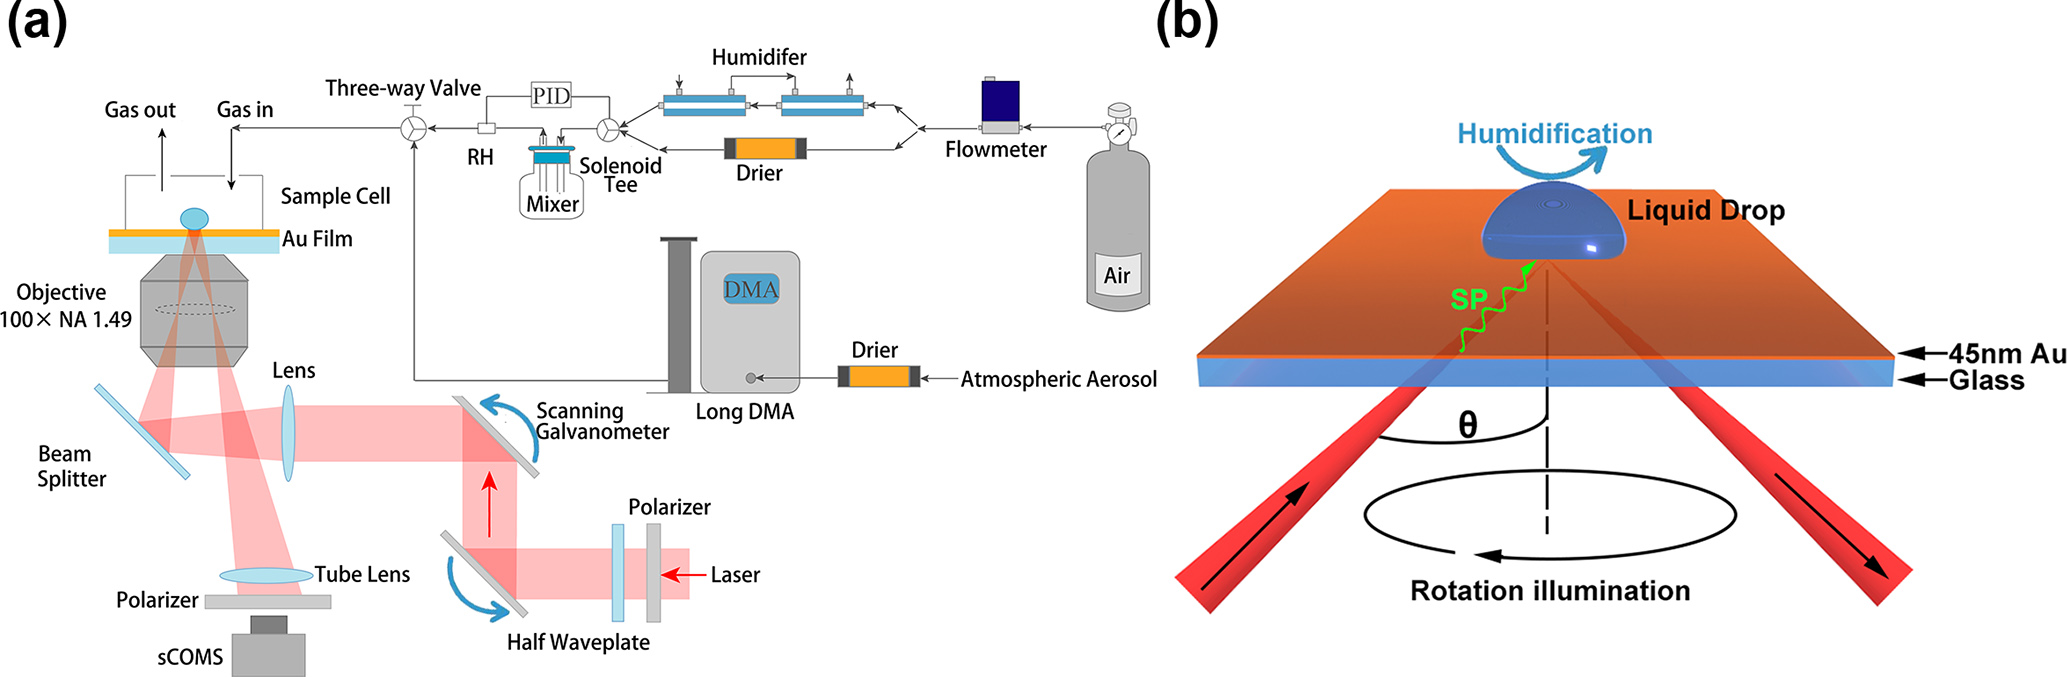 ACP - Atmospheric nanoparticles hygroscopic growth measurement by 